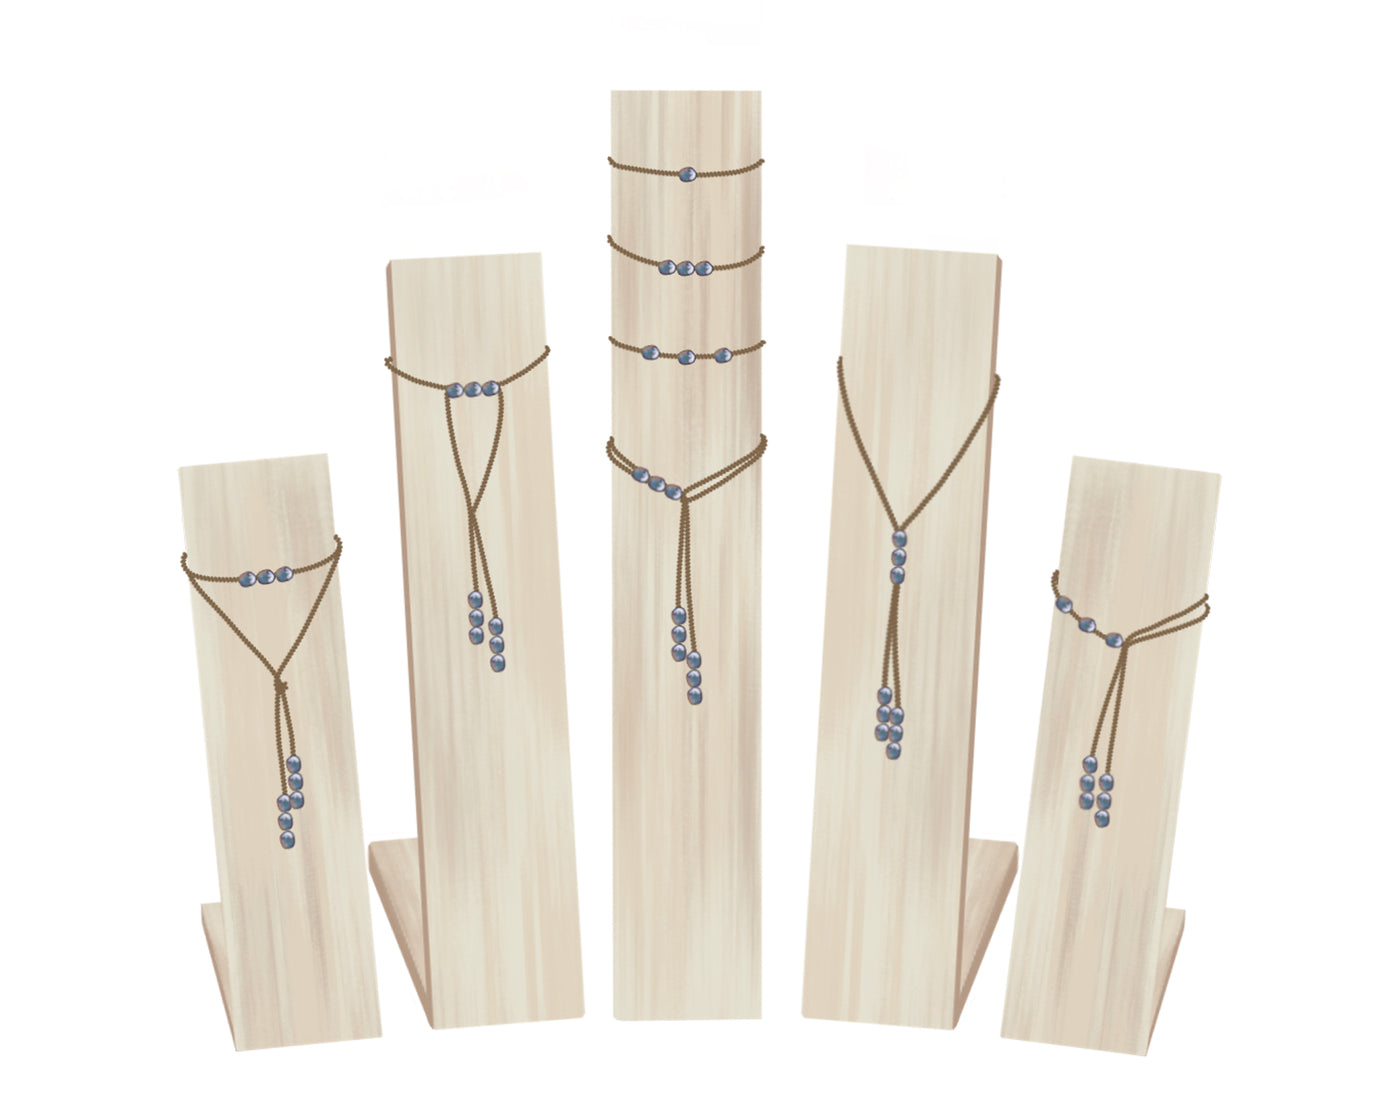 the Total Tula-0001-One Necklace, Endless Possibilities